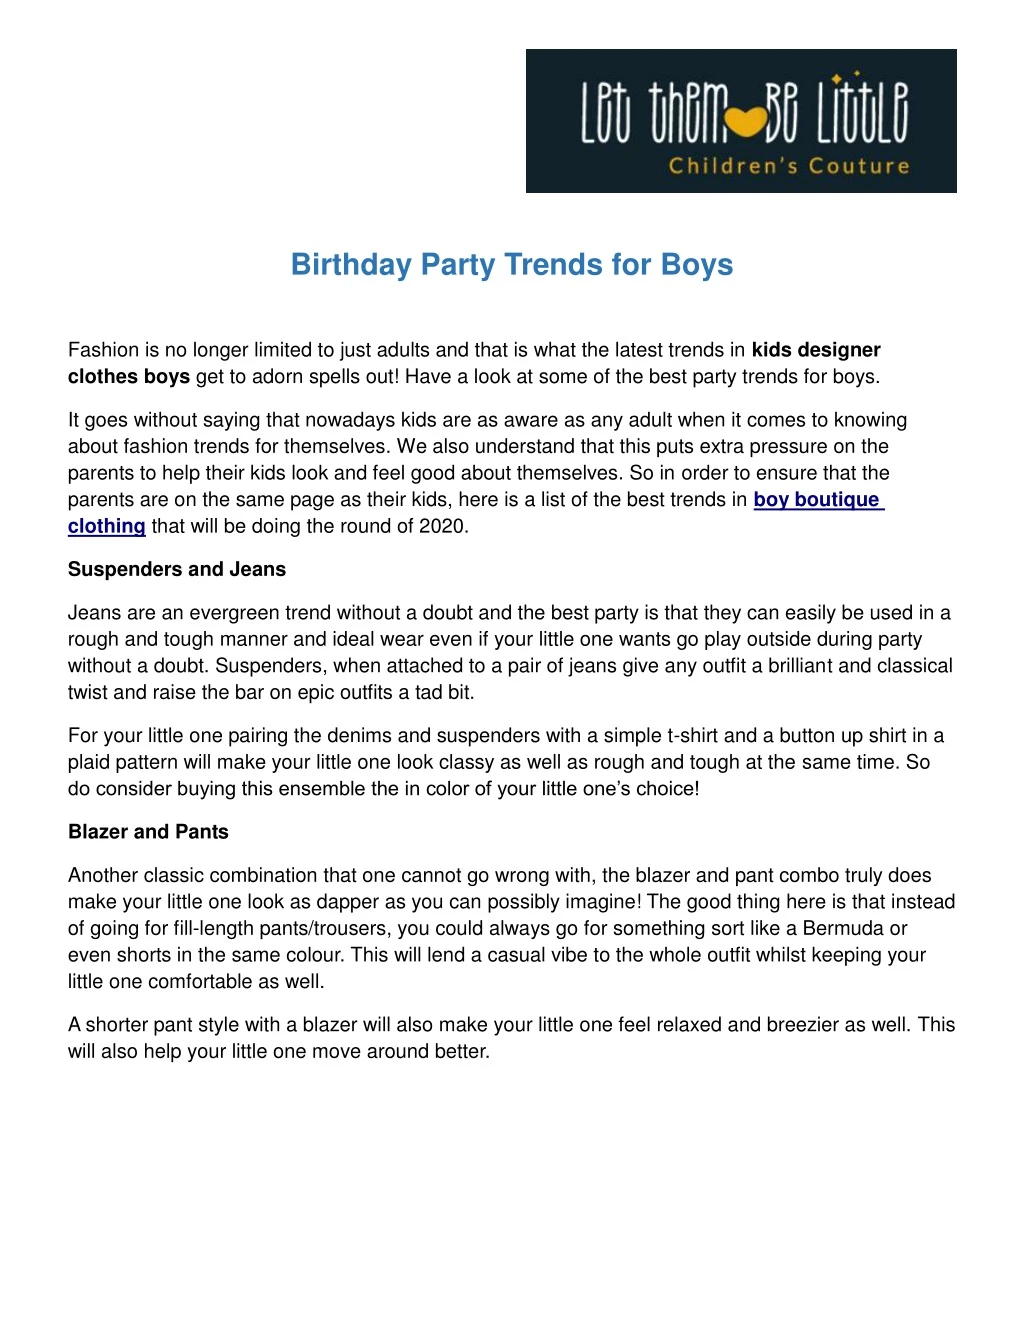 birthday party trends for boys